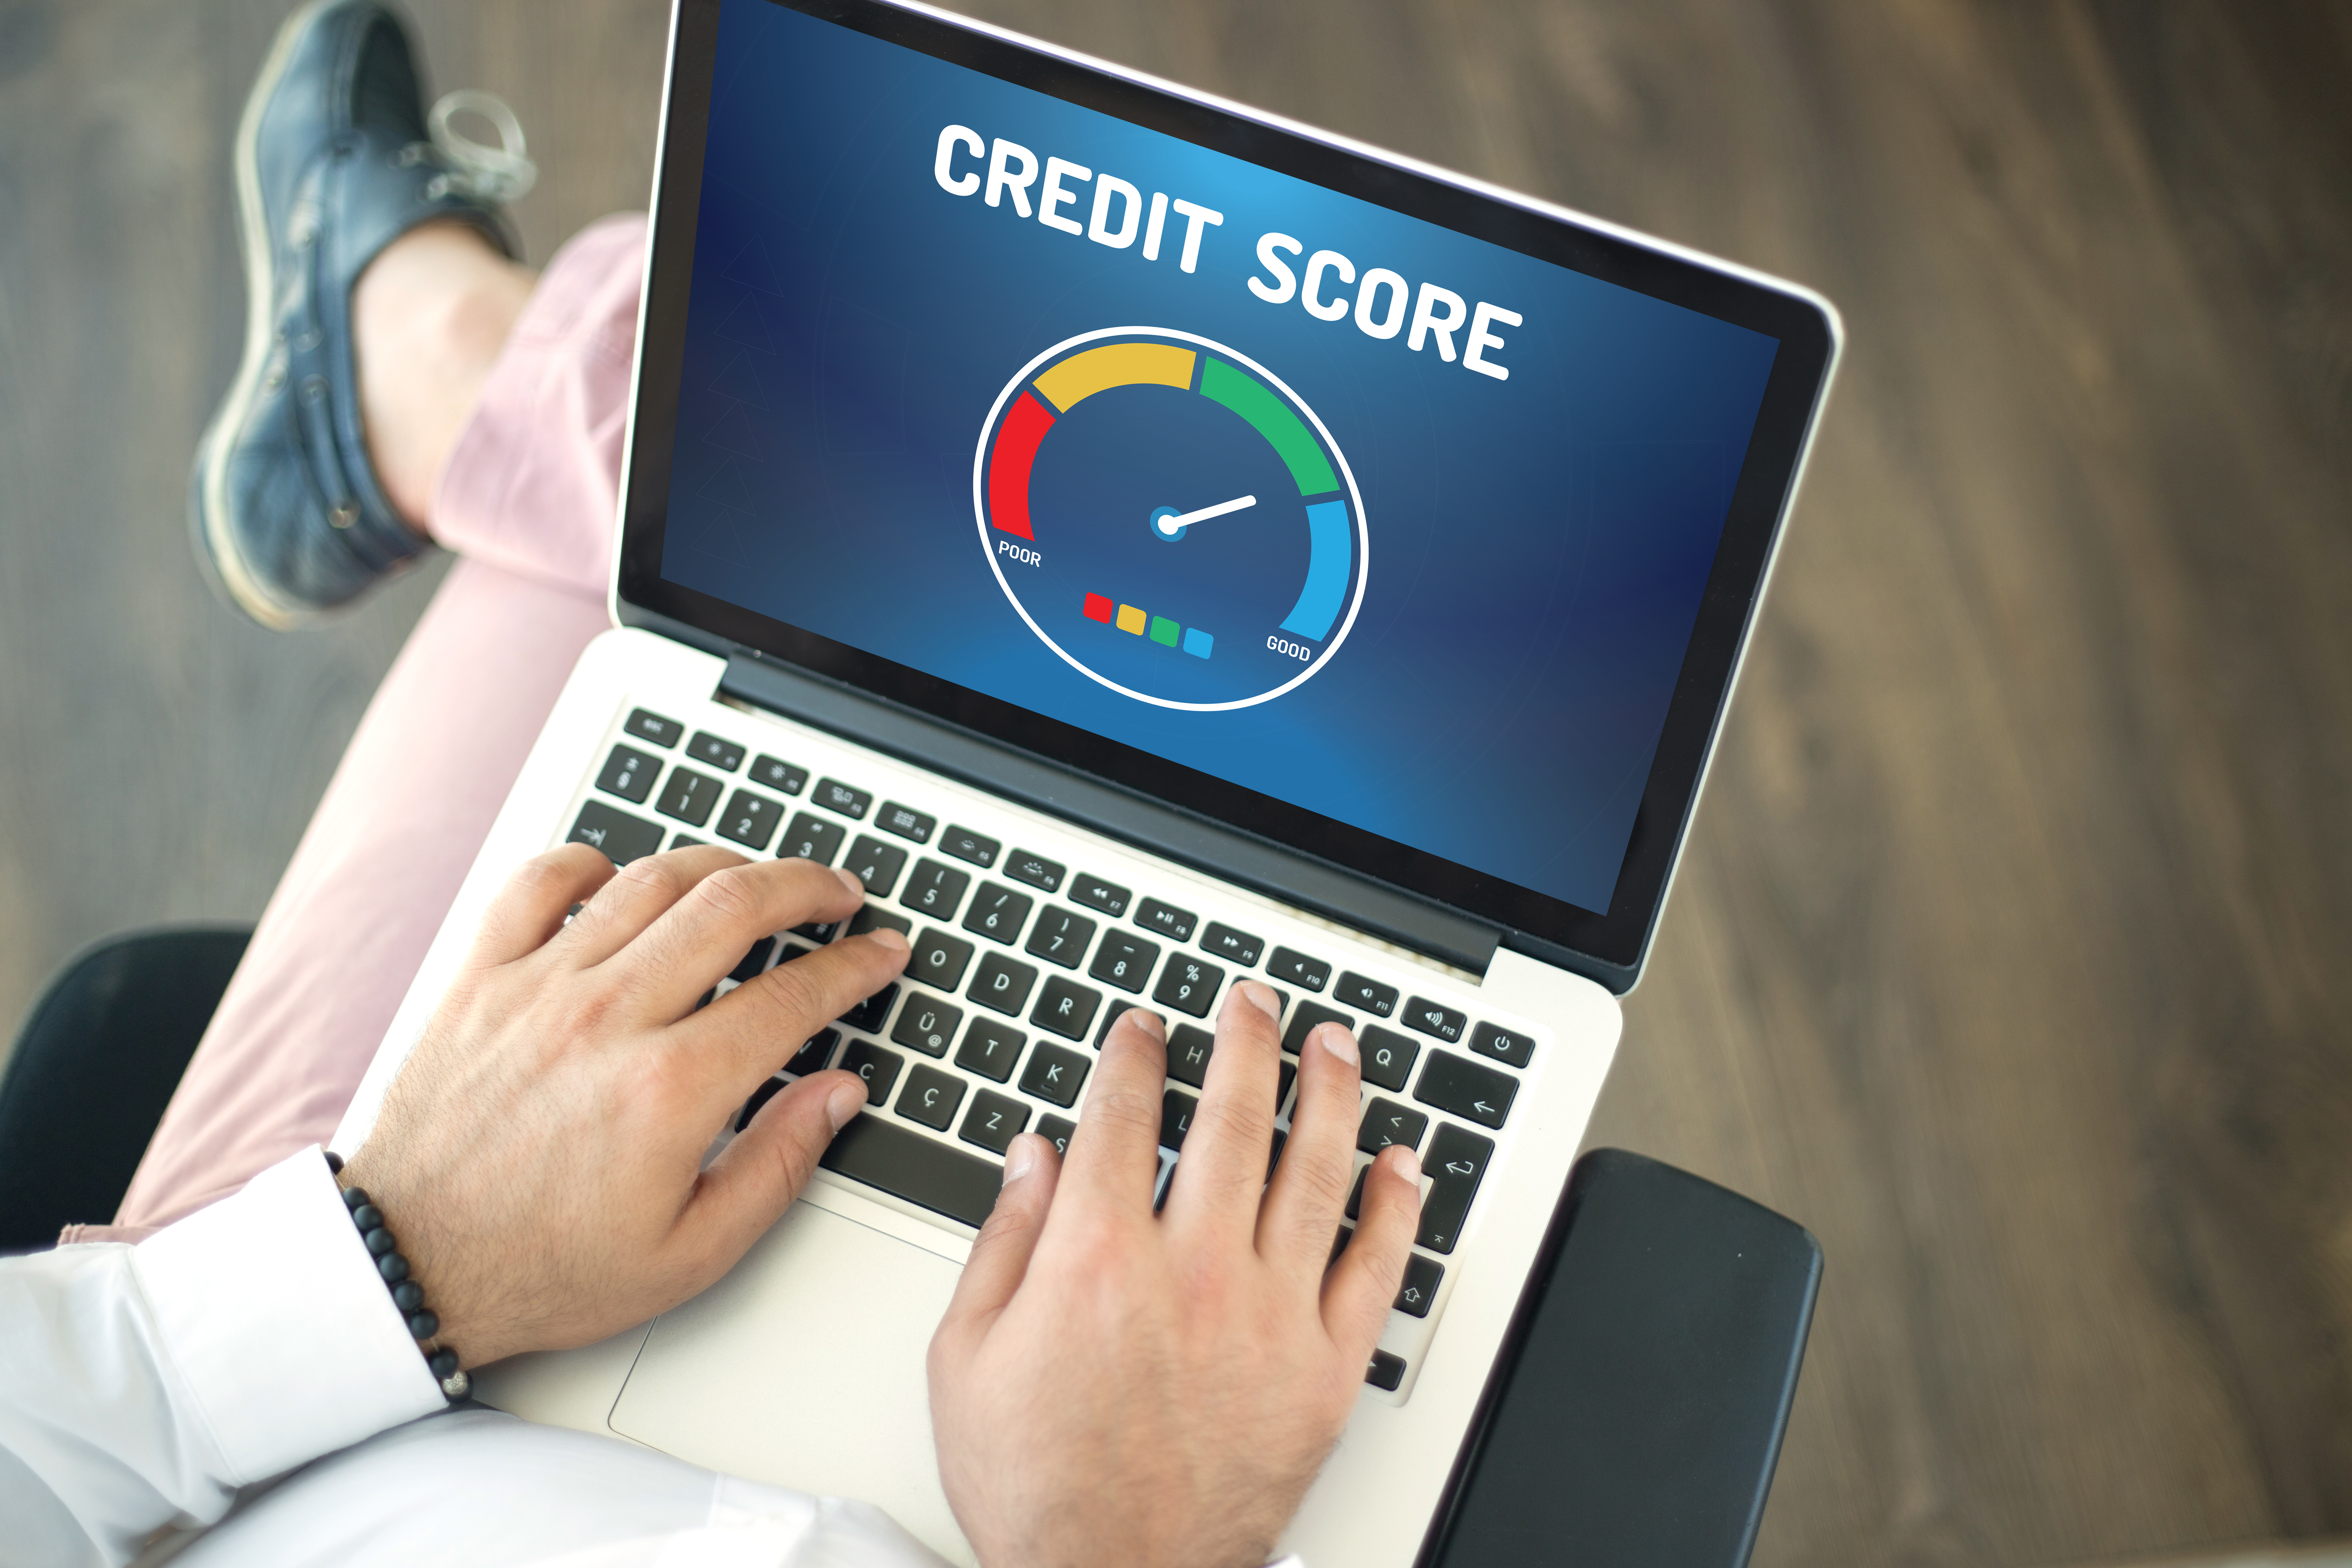 A man's hands typing on a laptop, with the screen displaying an image of a credit score scale, title CREDIT SCORE, posing the question, What does bankruptcy do to my credit in Minnesota?